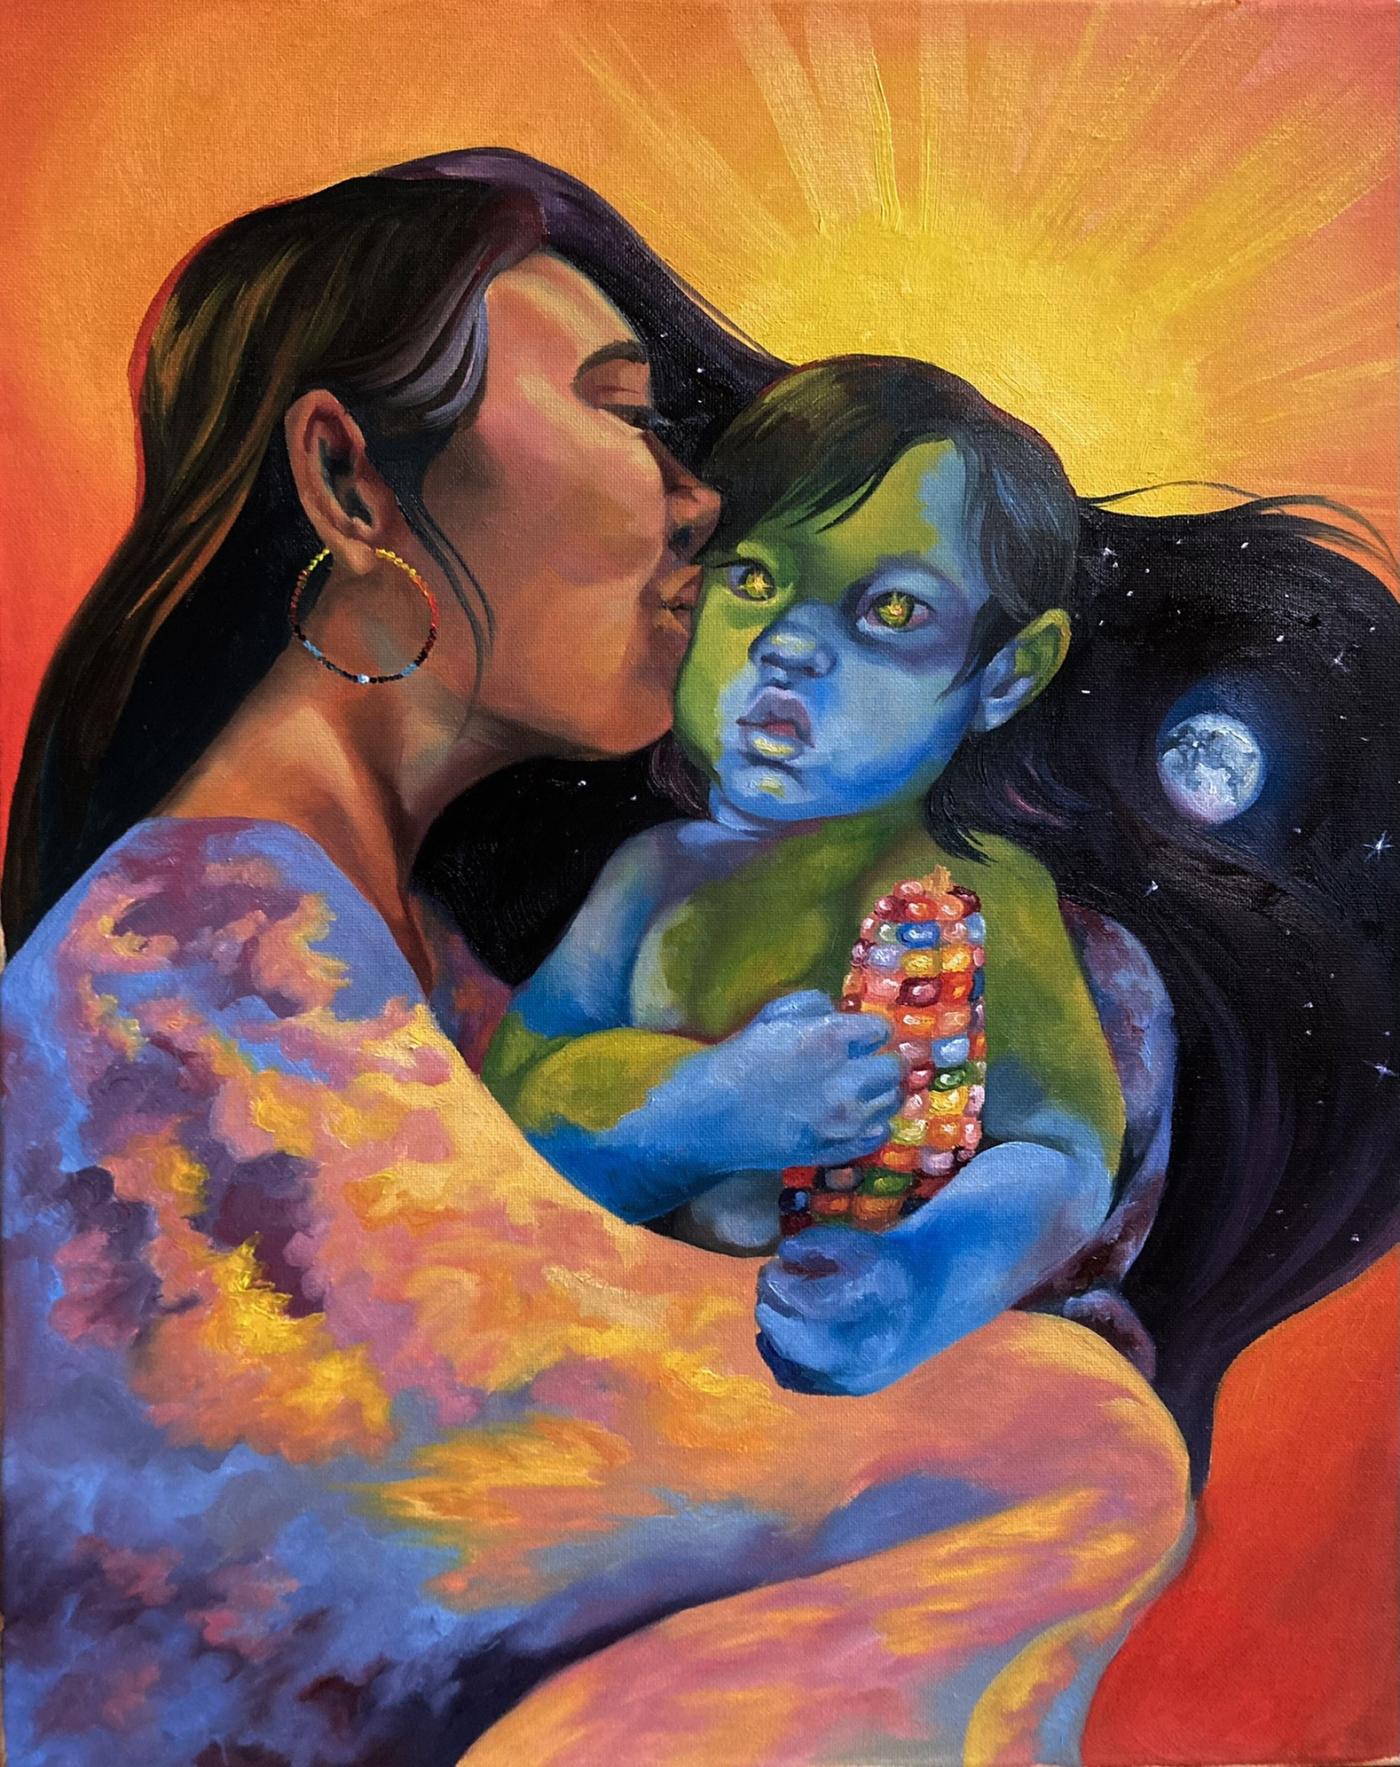 Painting of an Indigenous mother carrying and kissing a child whose skin resembles the oceans and landmasses of the earth viewed from above. The child is clutching an ear of rainbow corn, and an image of the earth viewed from space is superimposed on the mother’s dark flowing hair. 